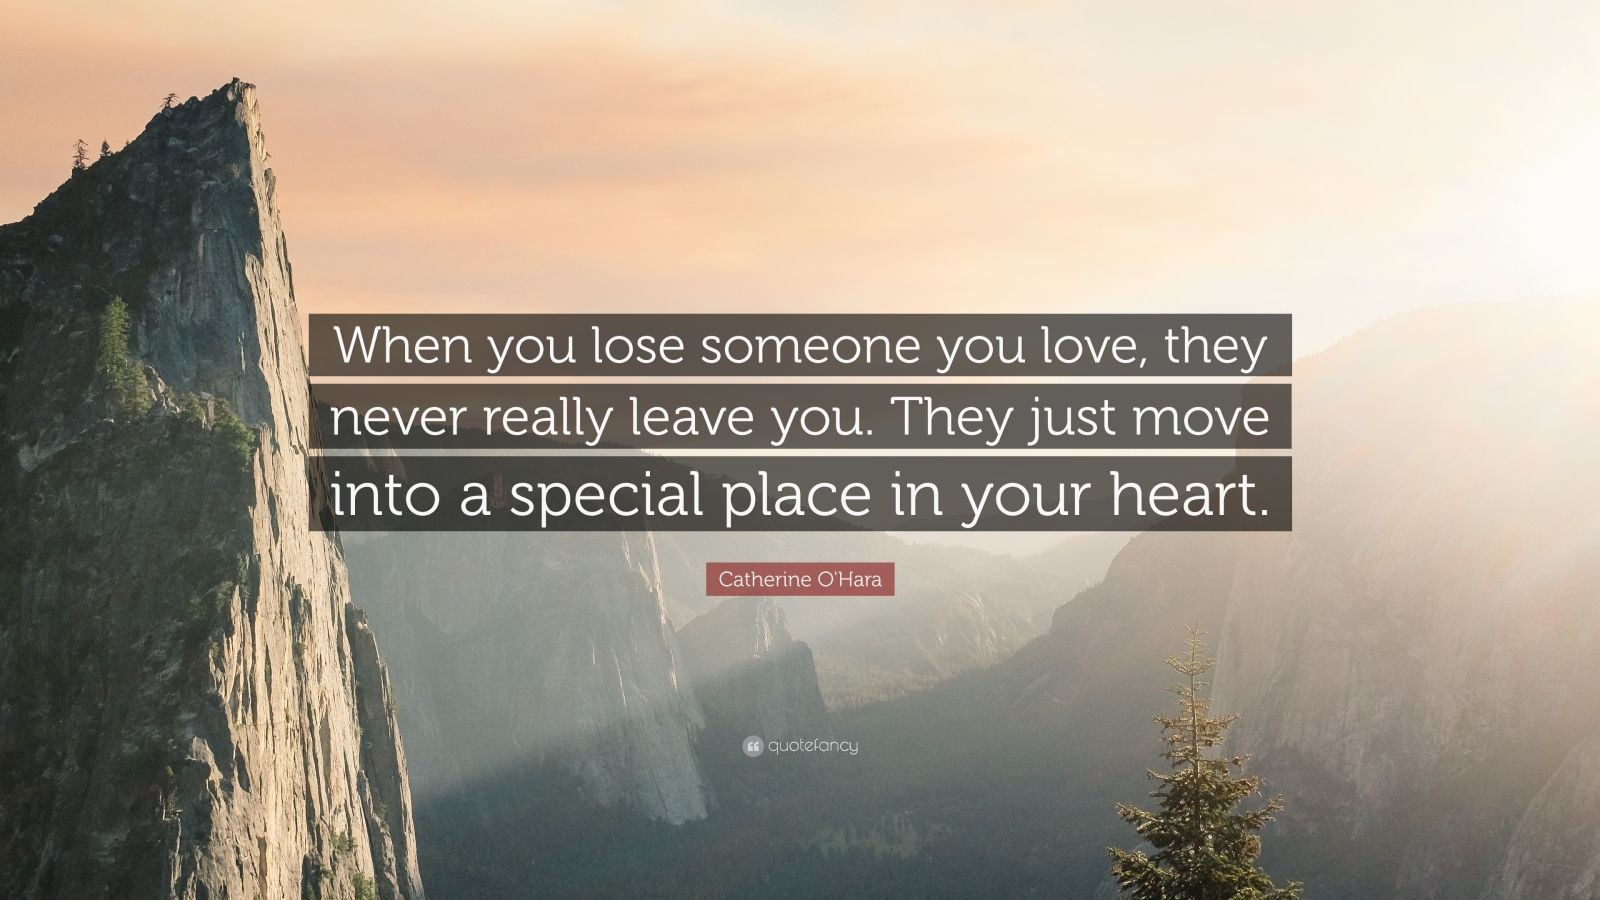 Catherine O'Hara Quote: “When you lose someone you love, they never